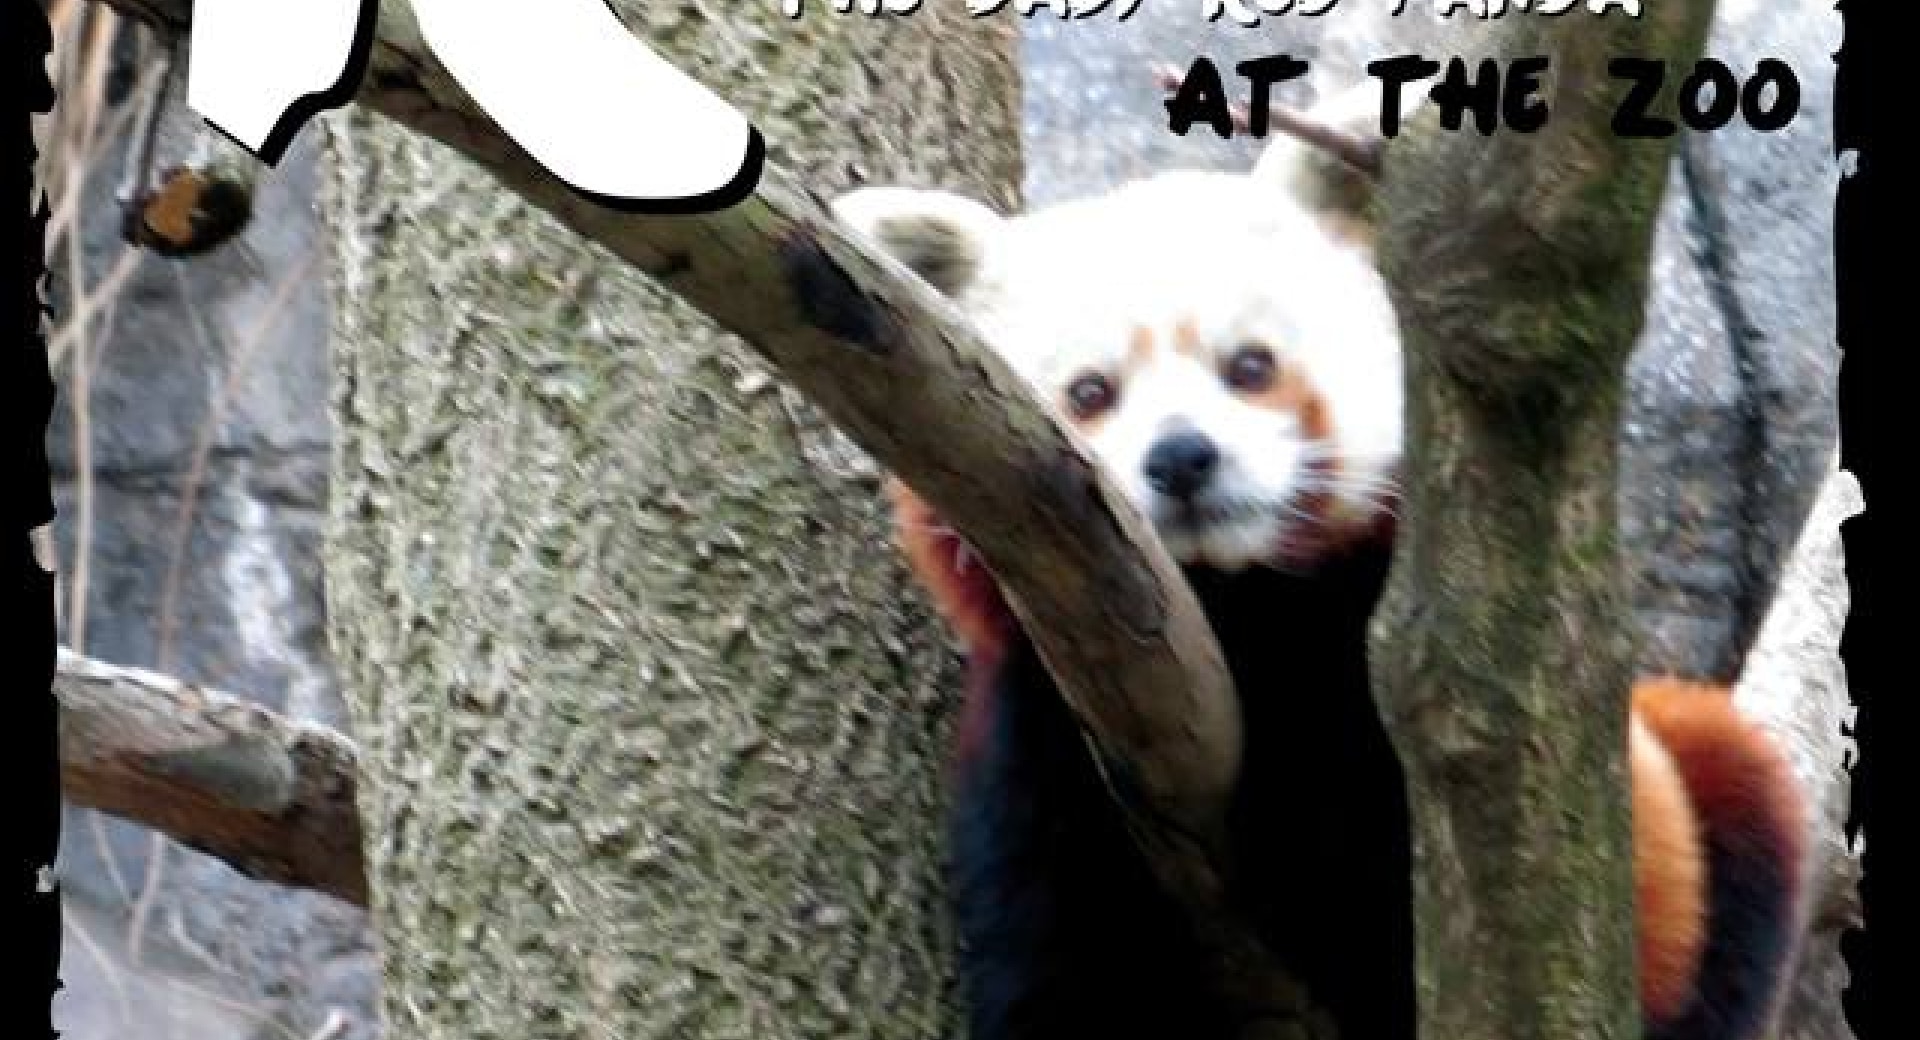 Red Panda Wisdom from a Cub called “Rojo”